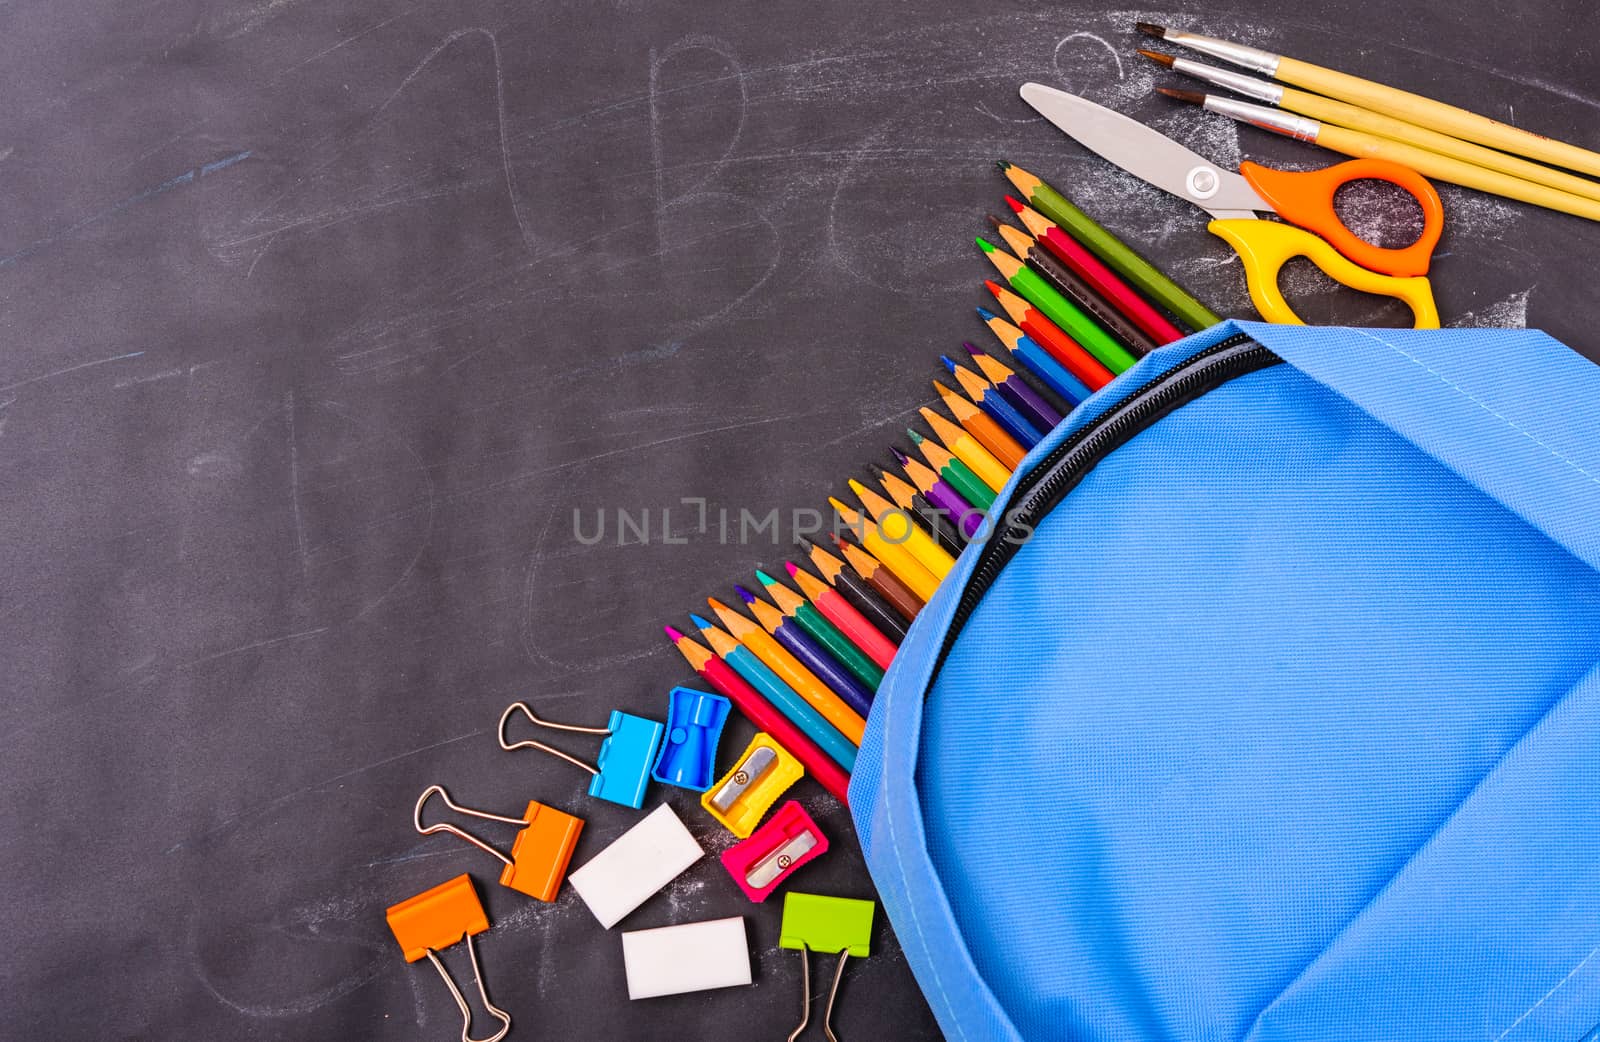 Back to school shopping backpack, The Accessories in student blue bag on blackboard background and have chalkboard also